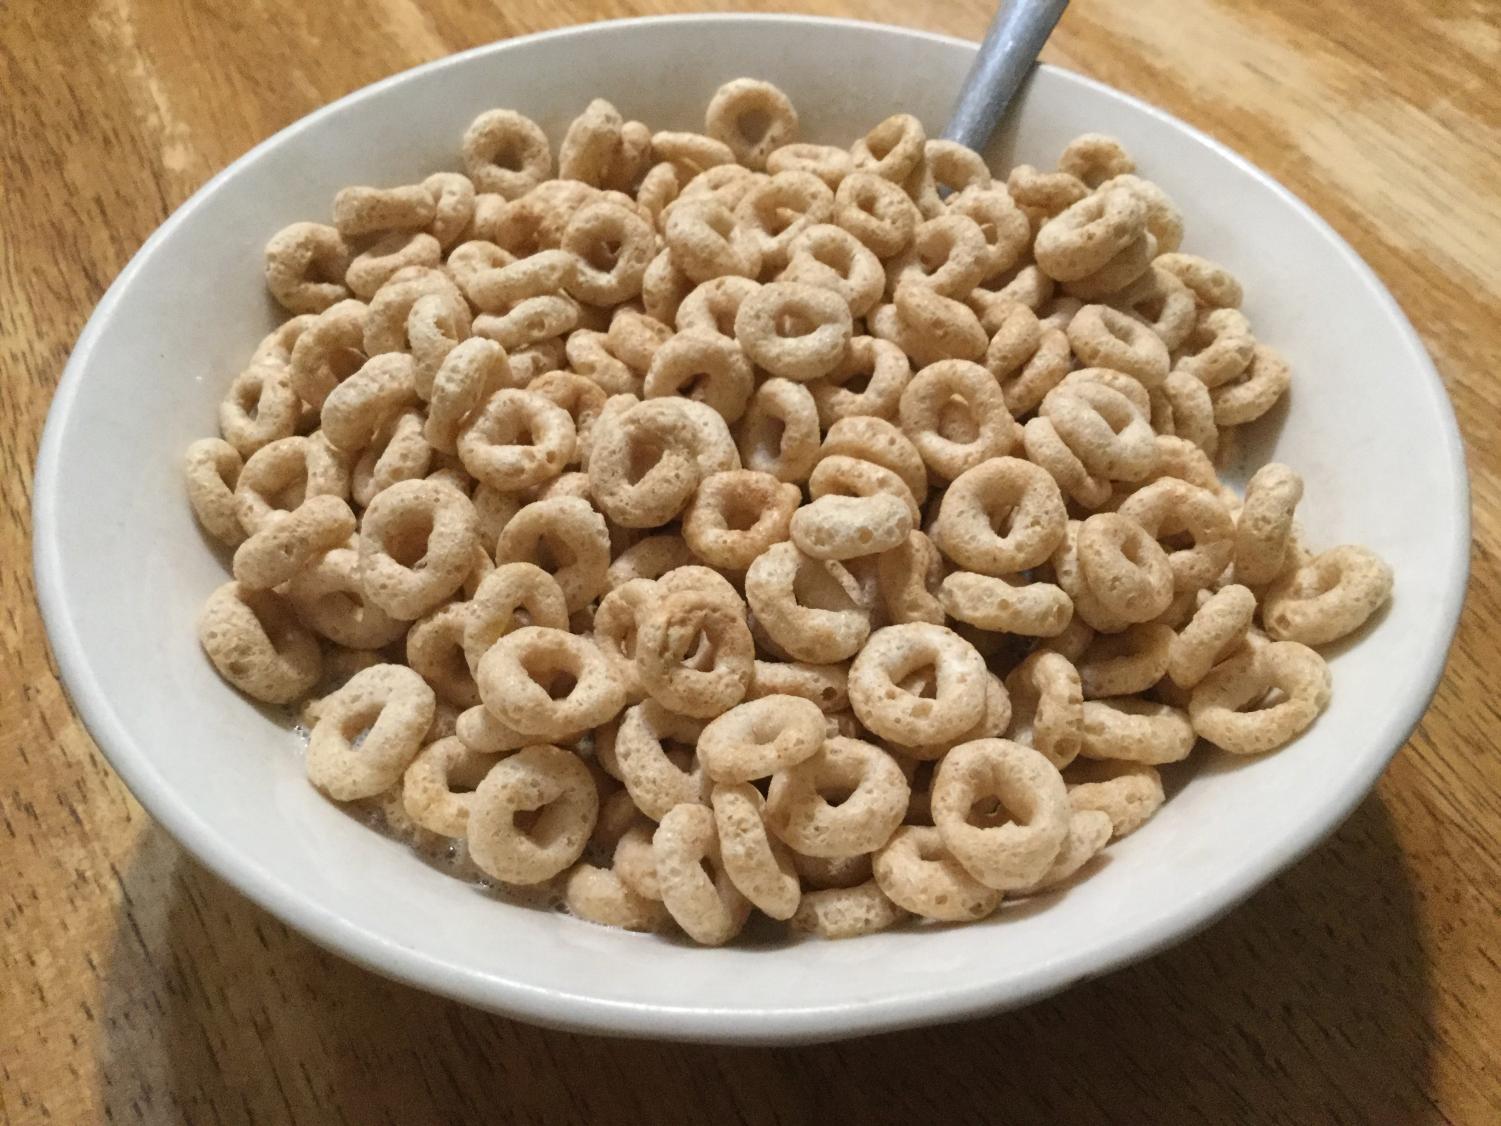 Why Milk and Cereal is Overrated